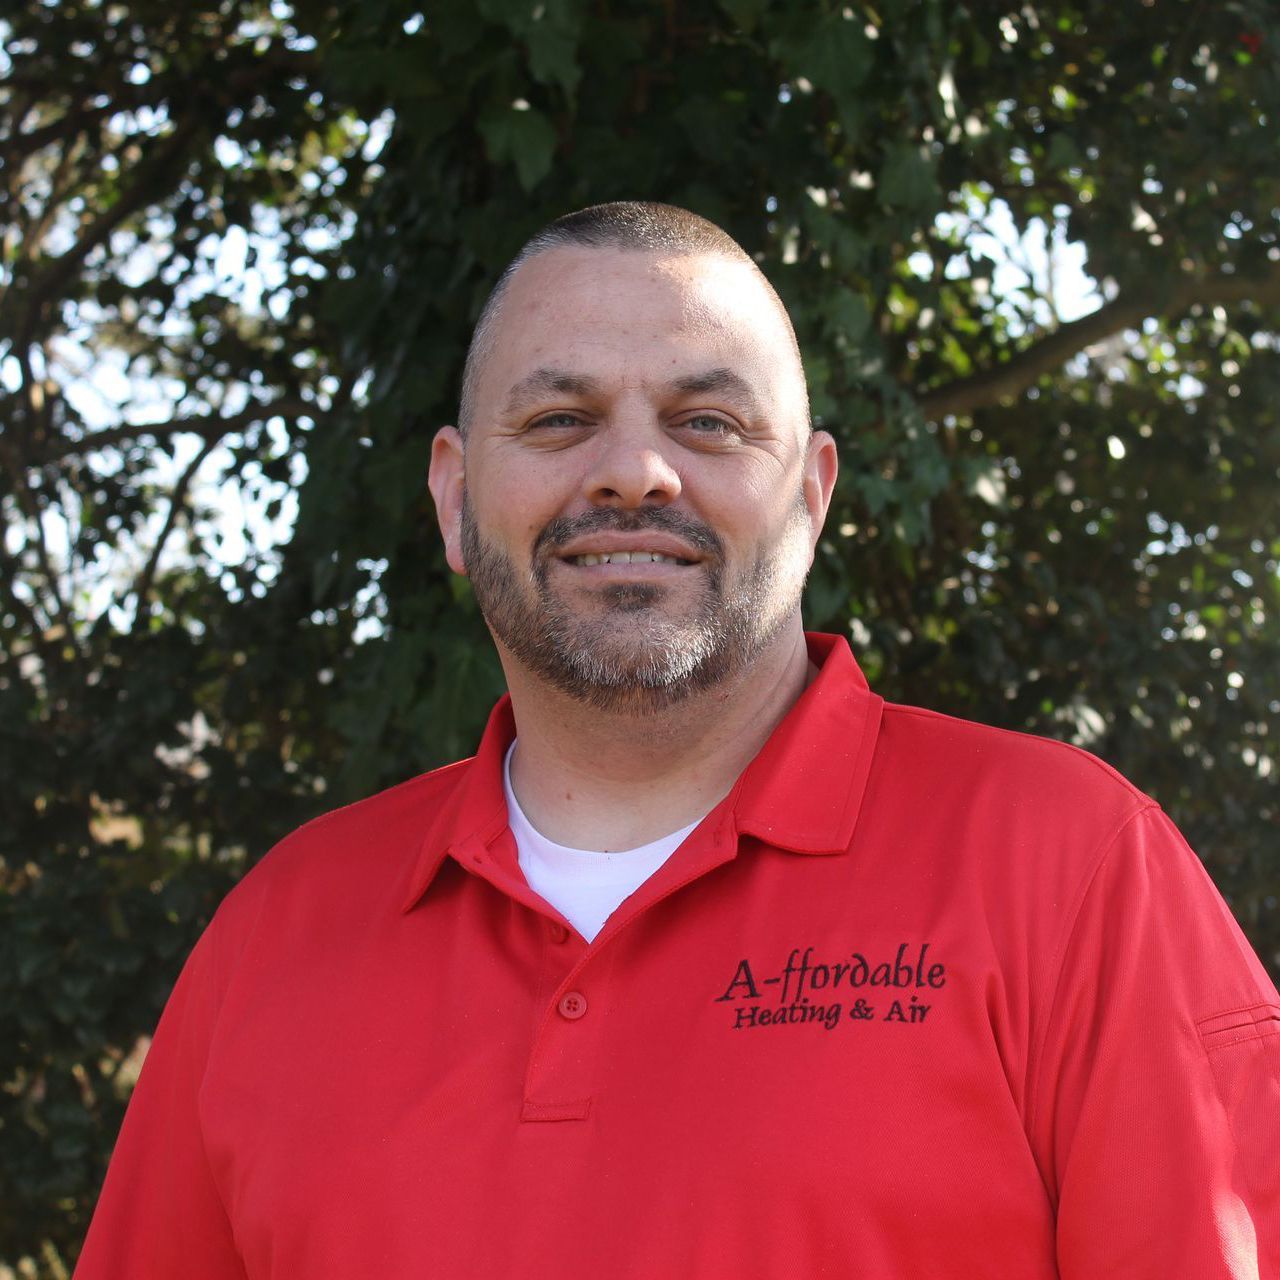 Roger Robertson of A-ffordable Heating & Air, Inc.